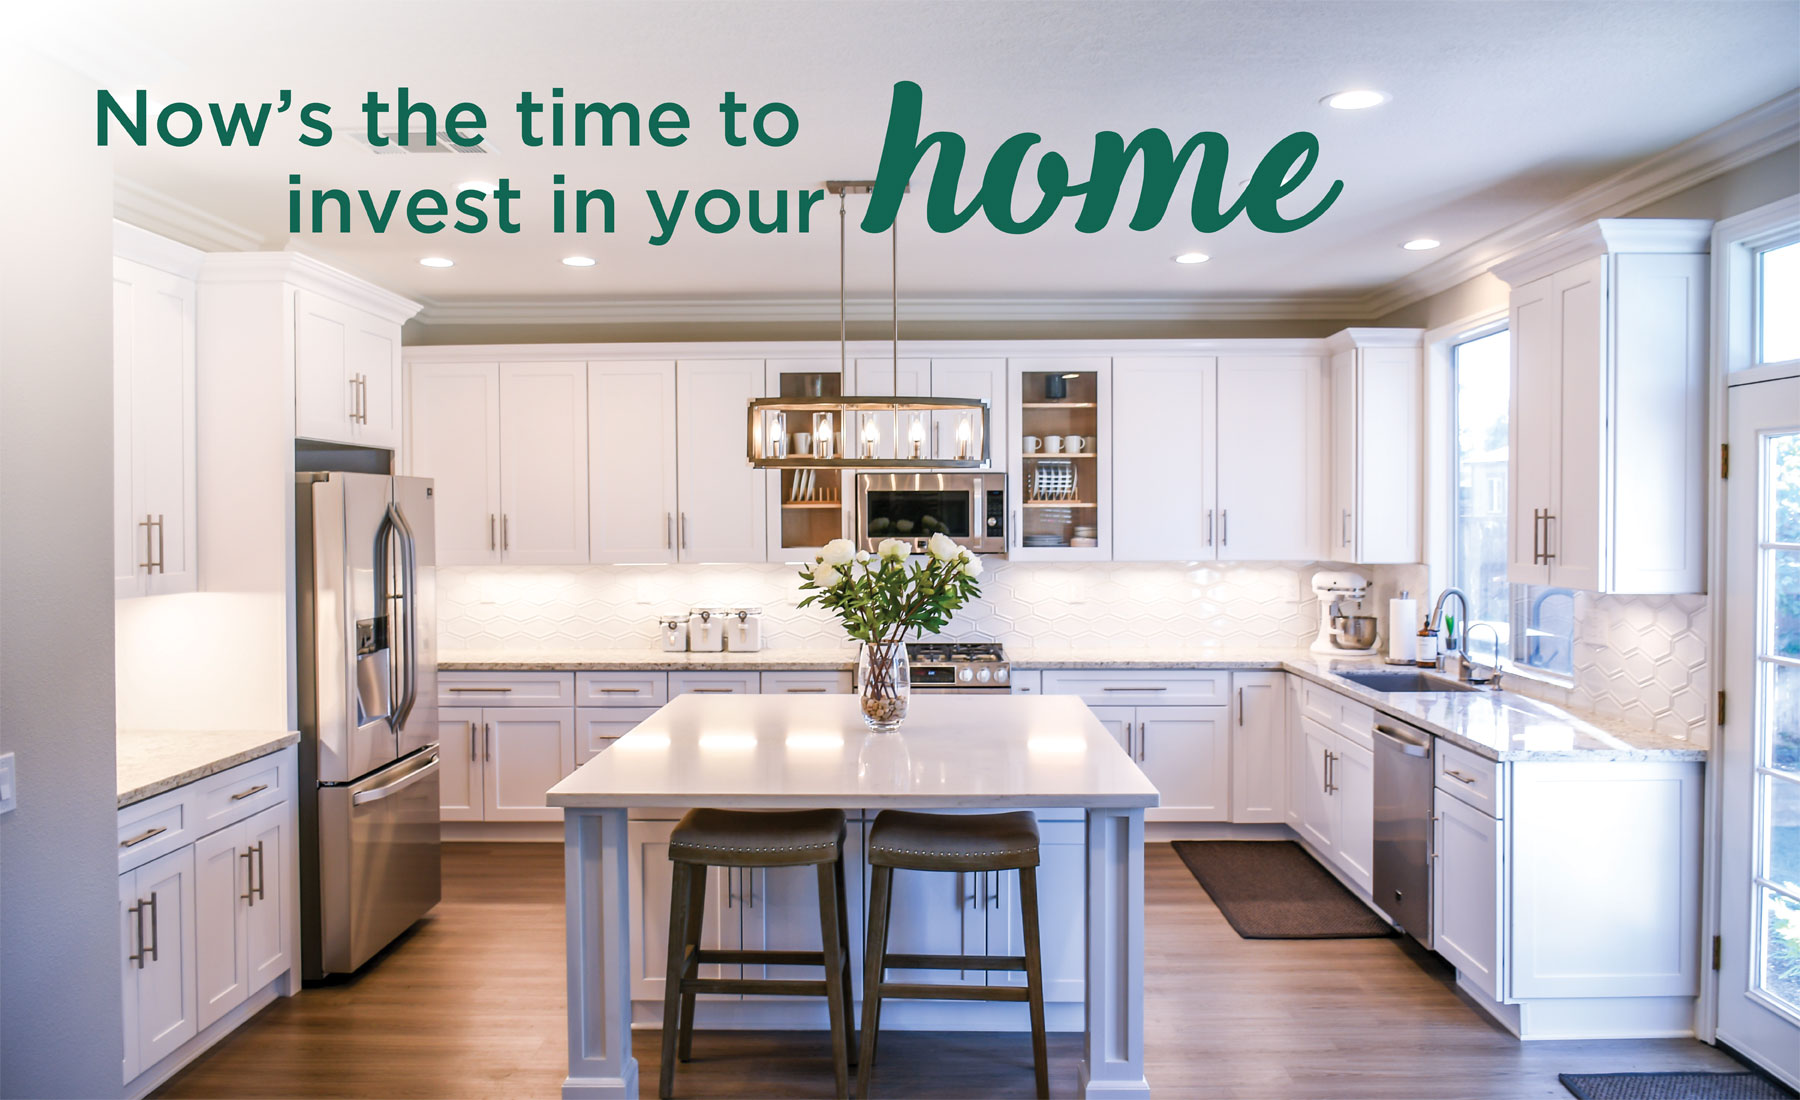 Now's the time to invest in your home